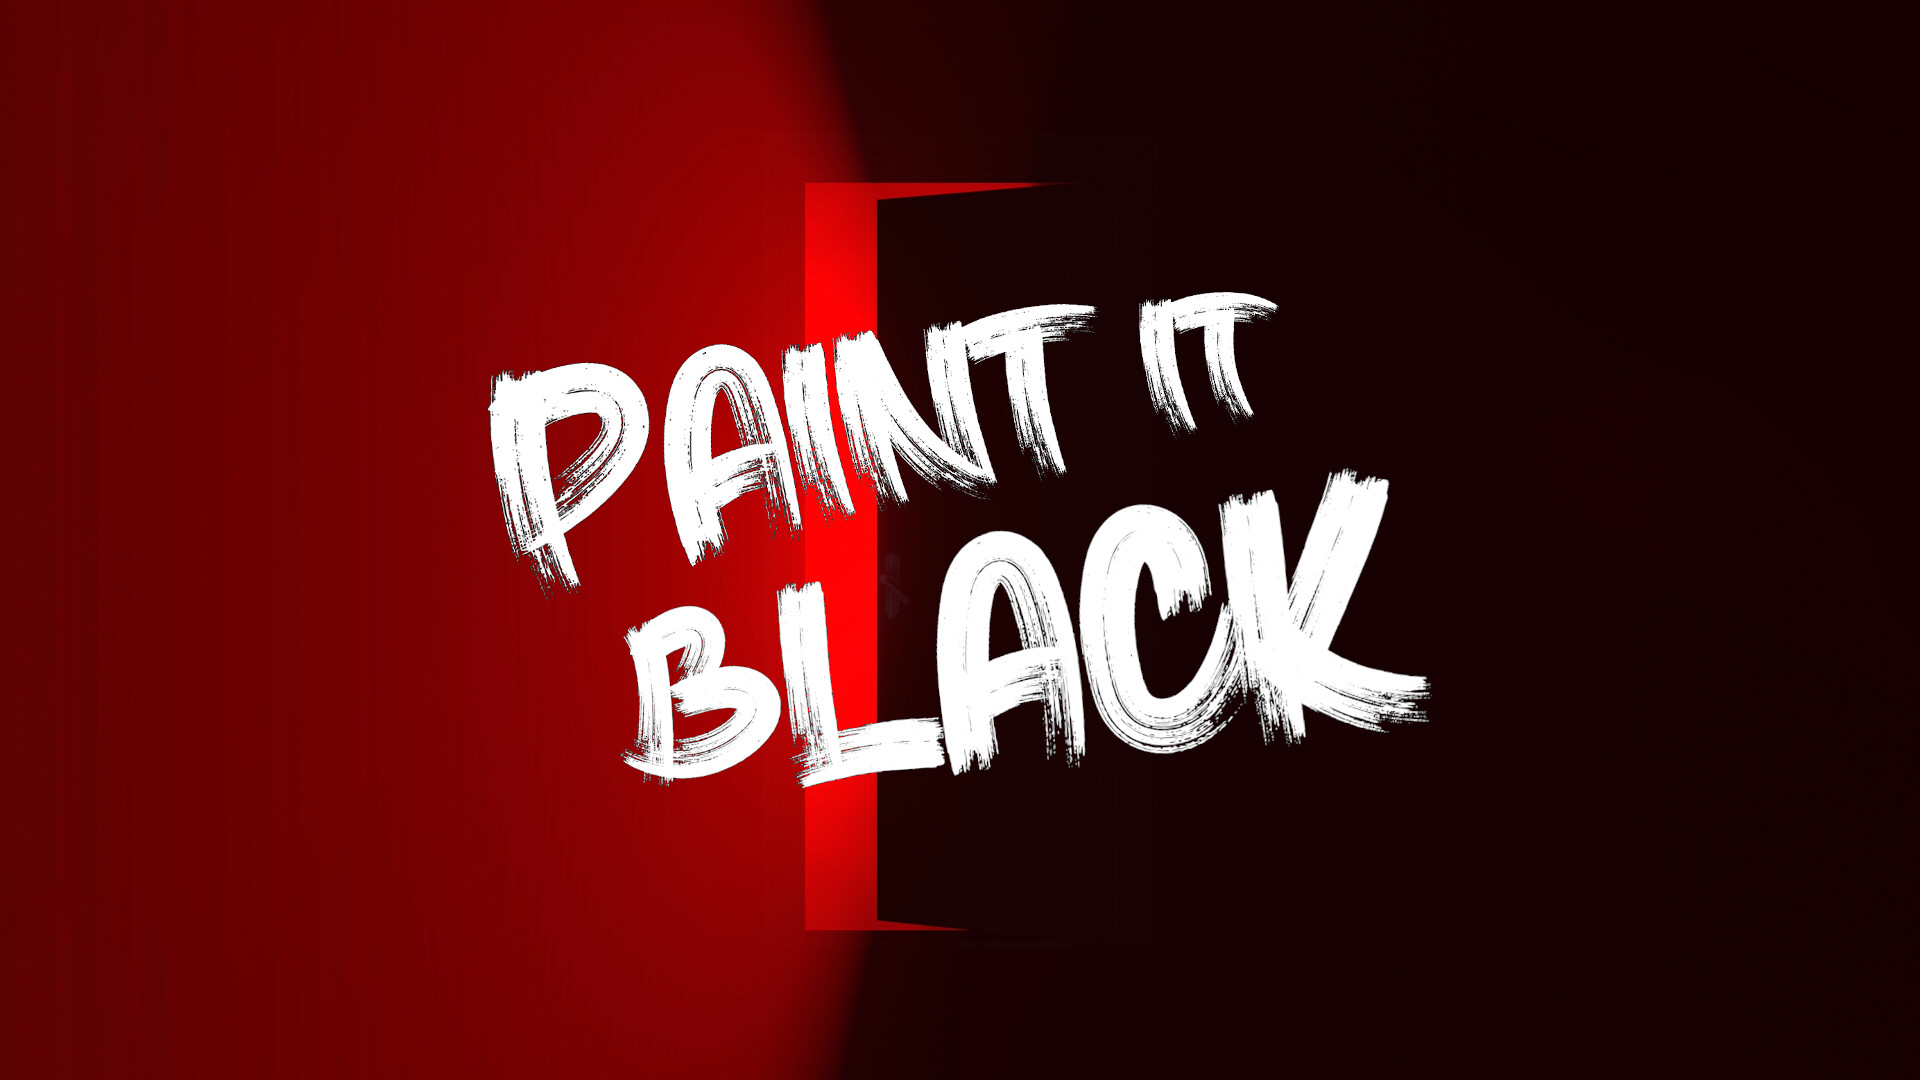 Patrick Jacquemont - Paint it Black (Rolling Stones cover) - Animated Music  Video